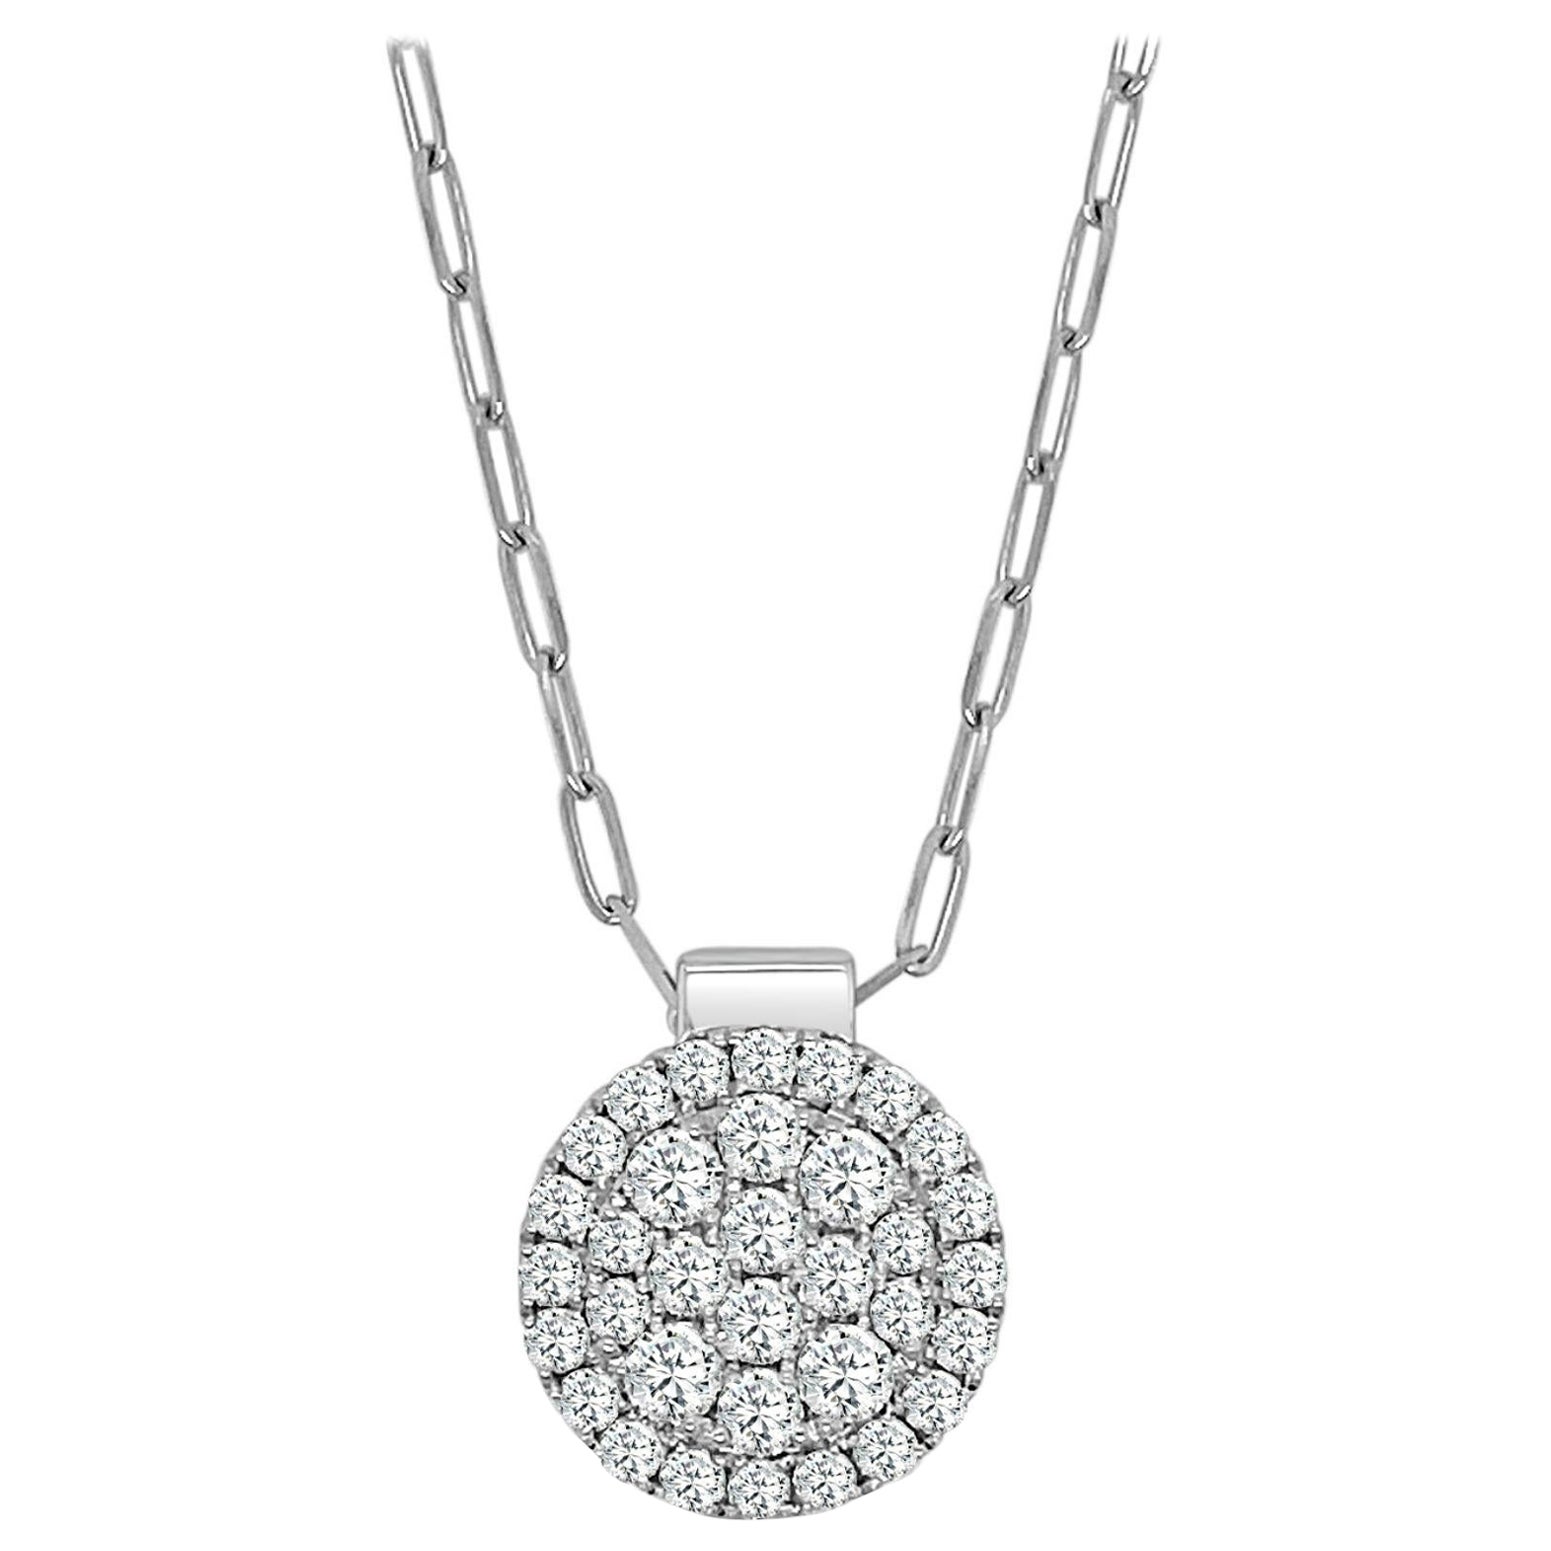 Frederic Sage Pendentif en or blanc 14 carats taille moyenne 2 rond Firenze ii diamants